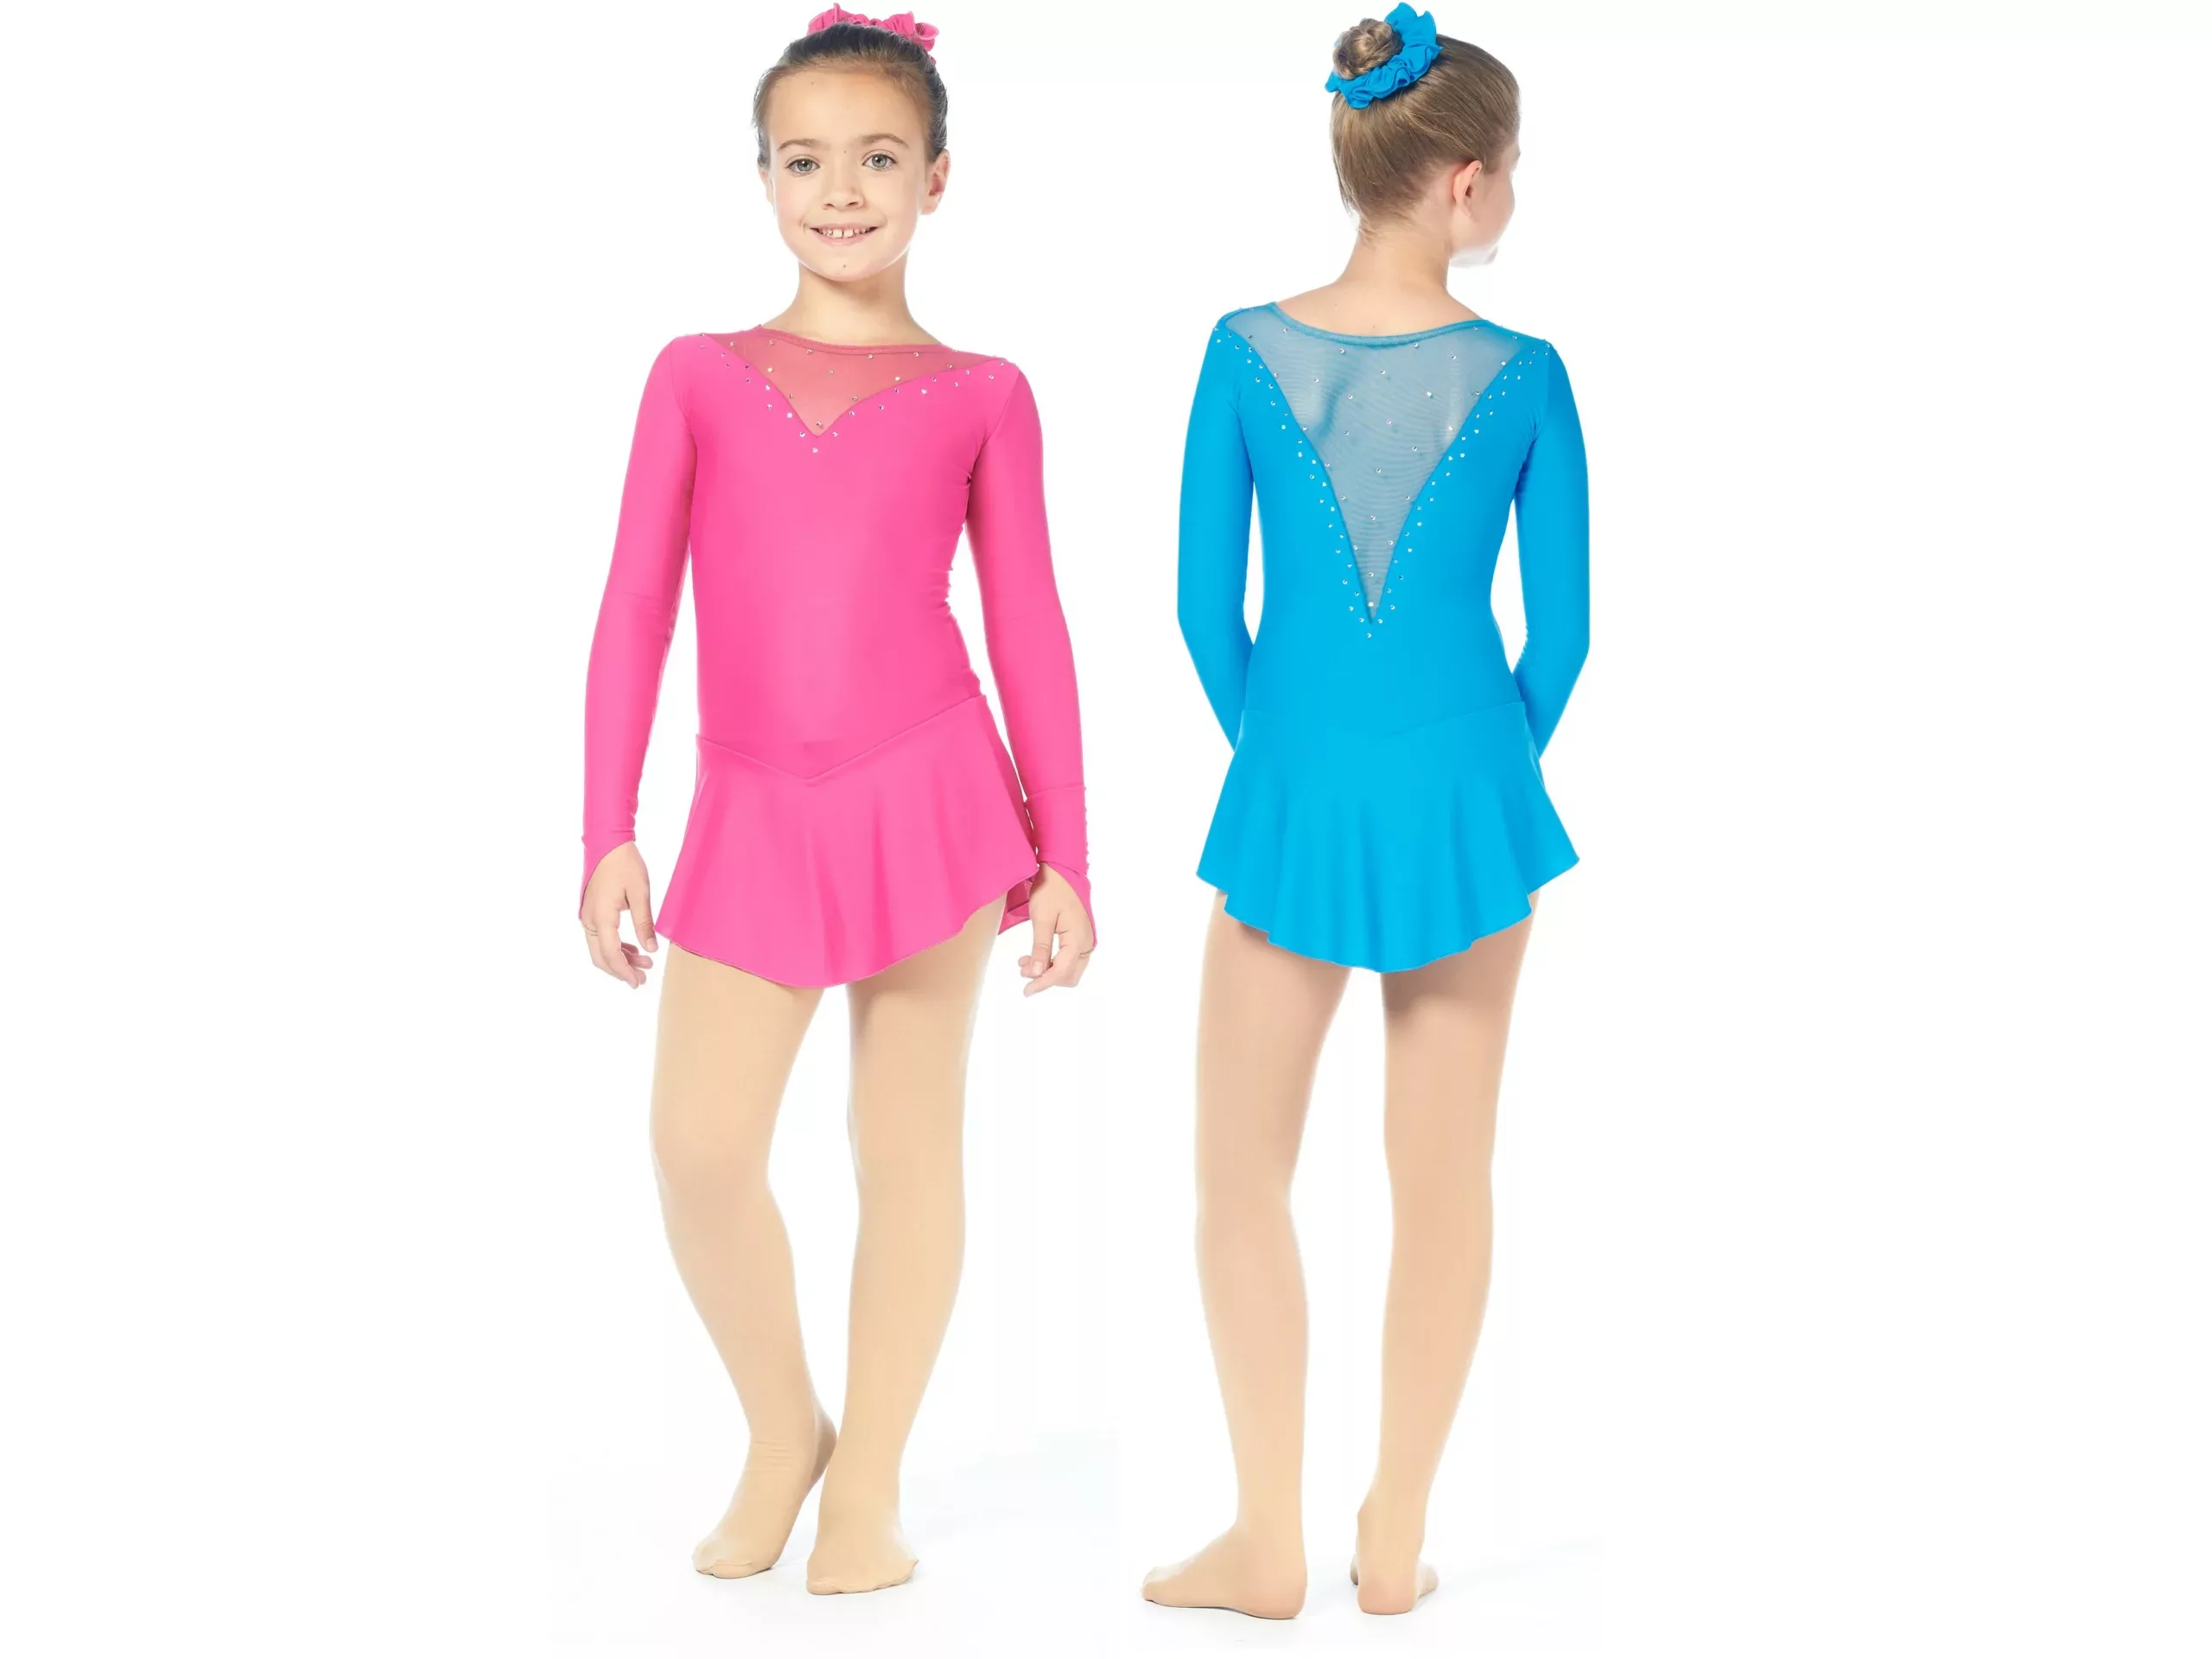 Robe de patinage artistique Sagester Style : 201, fuchsia Robes